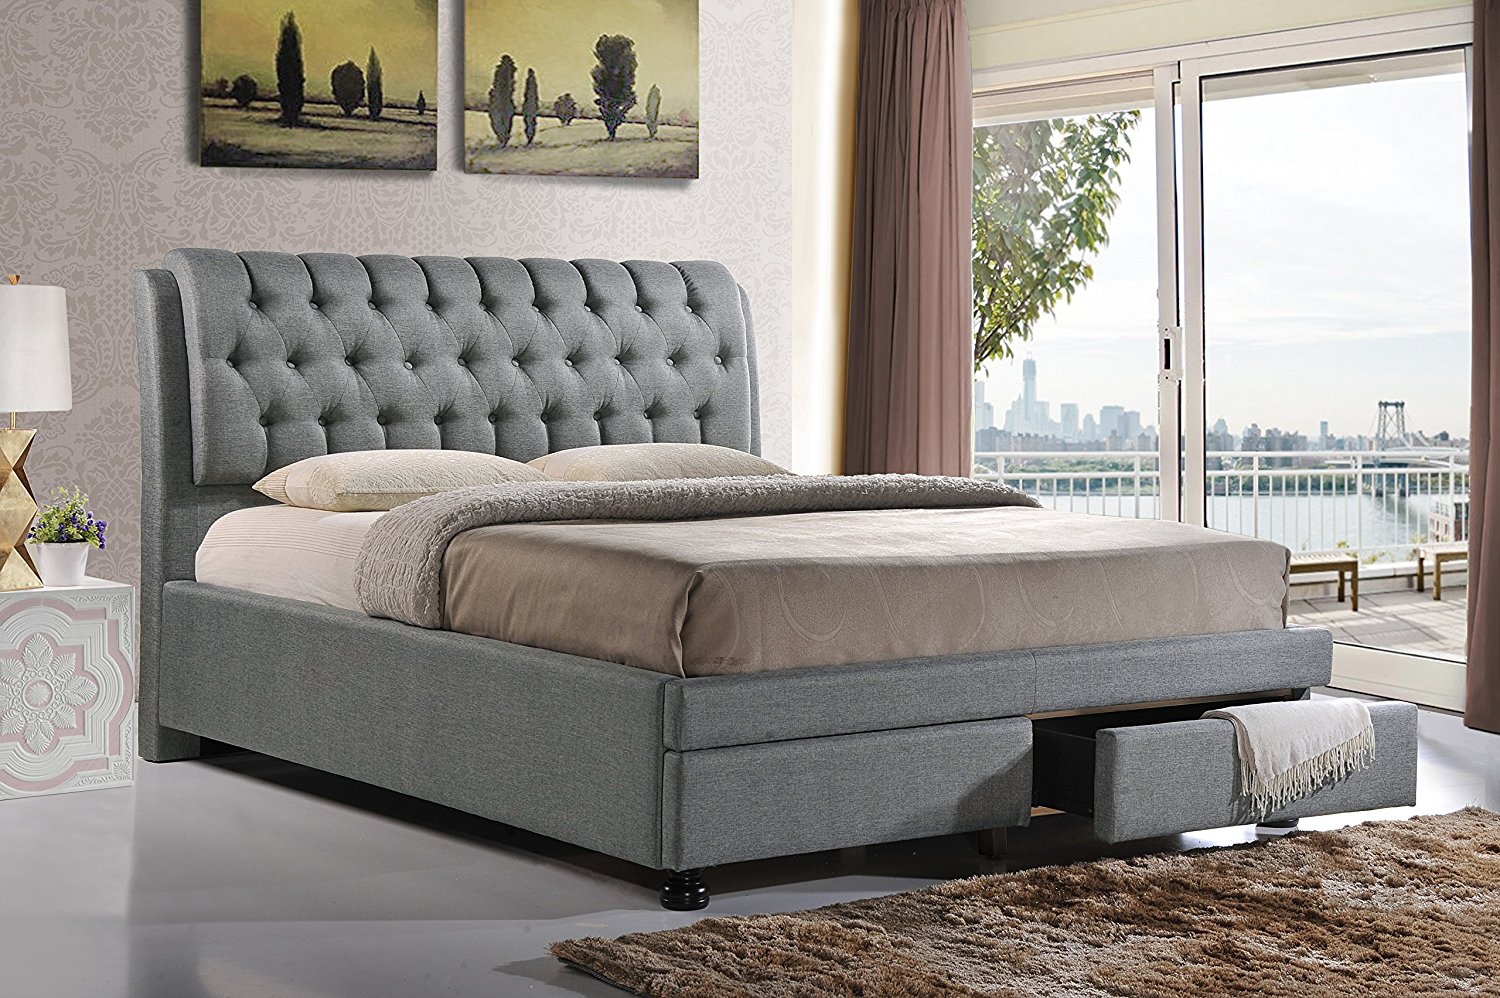 Baxton Studio Ainge Contemporary Button-Tufted Fabric Upholstered Storage Bed with 2 Drawers, Queen, Grey